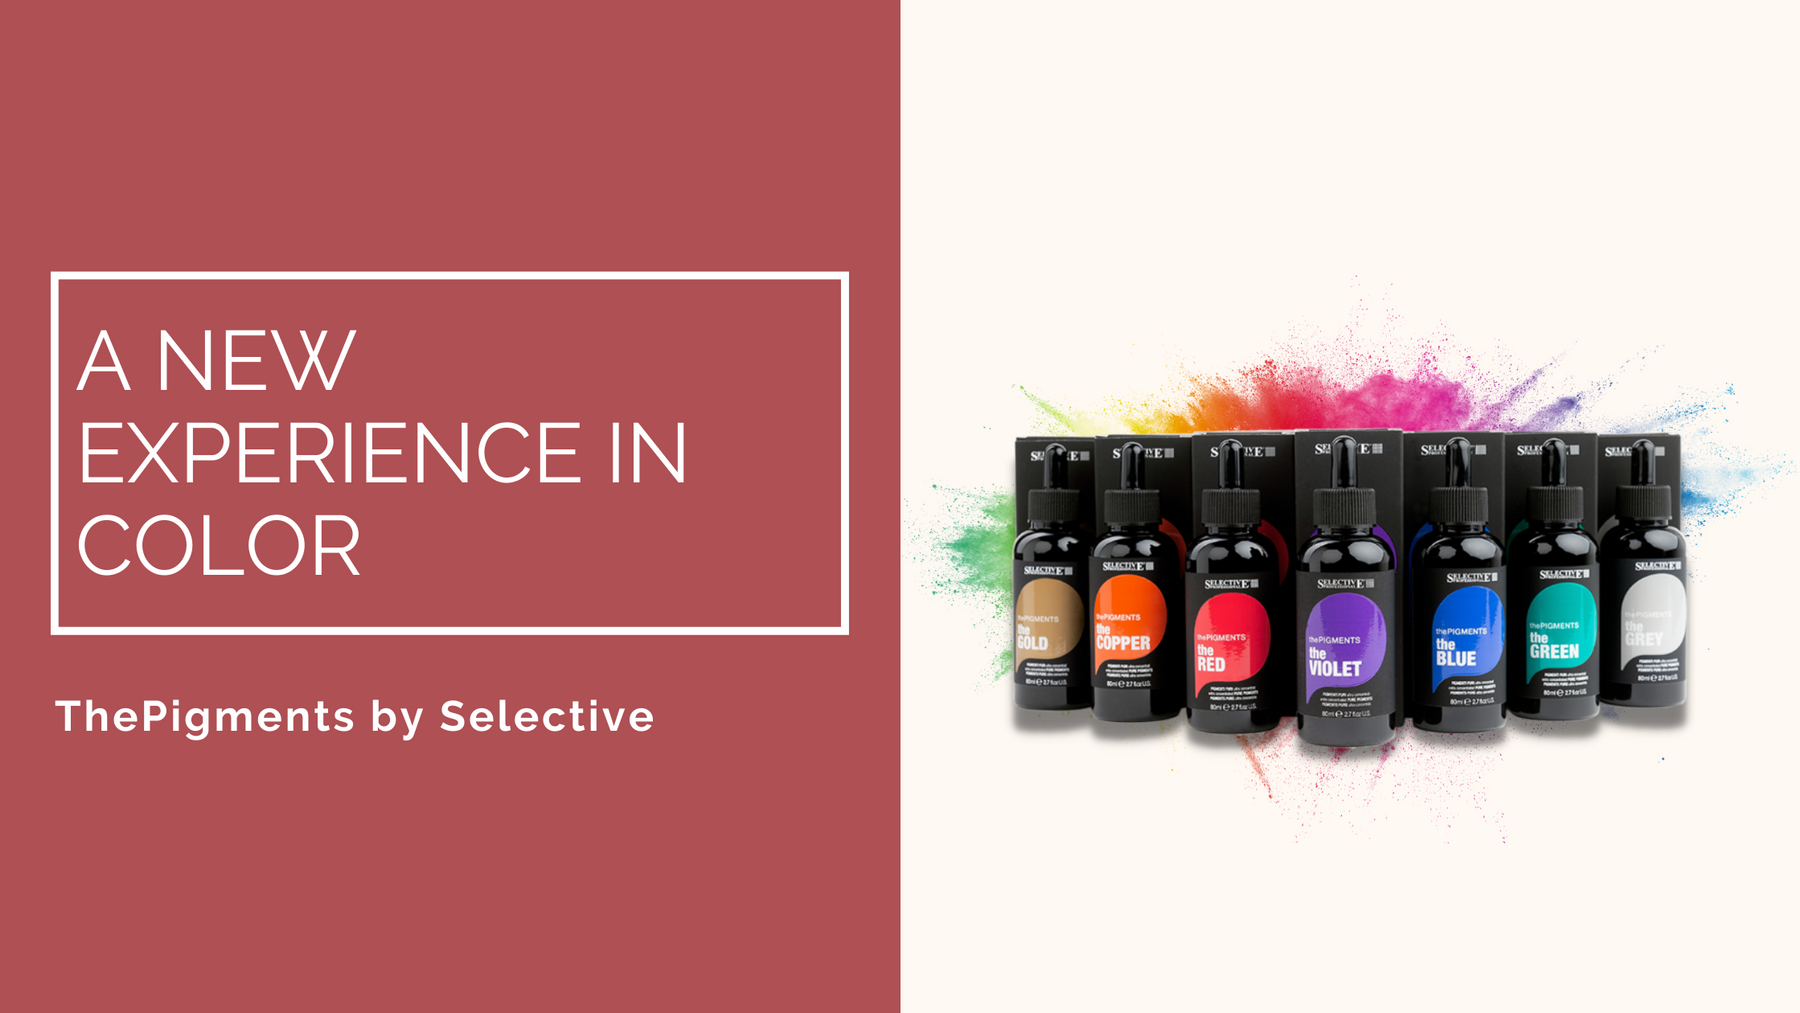 The Pigments by Selective : A new experience in color